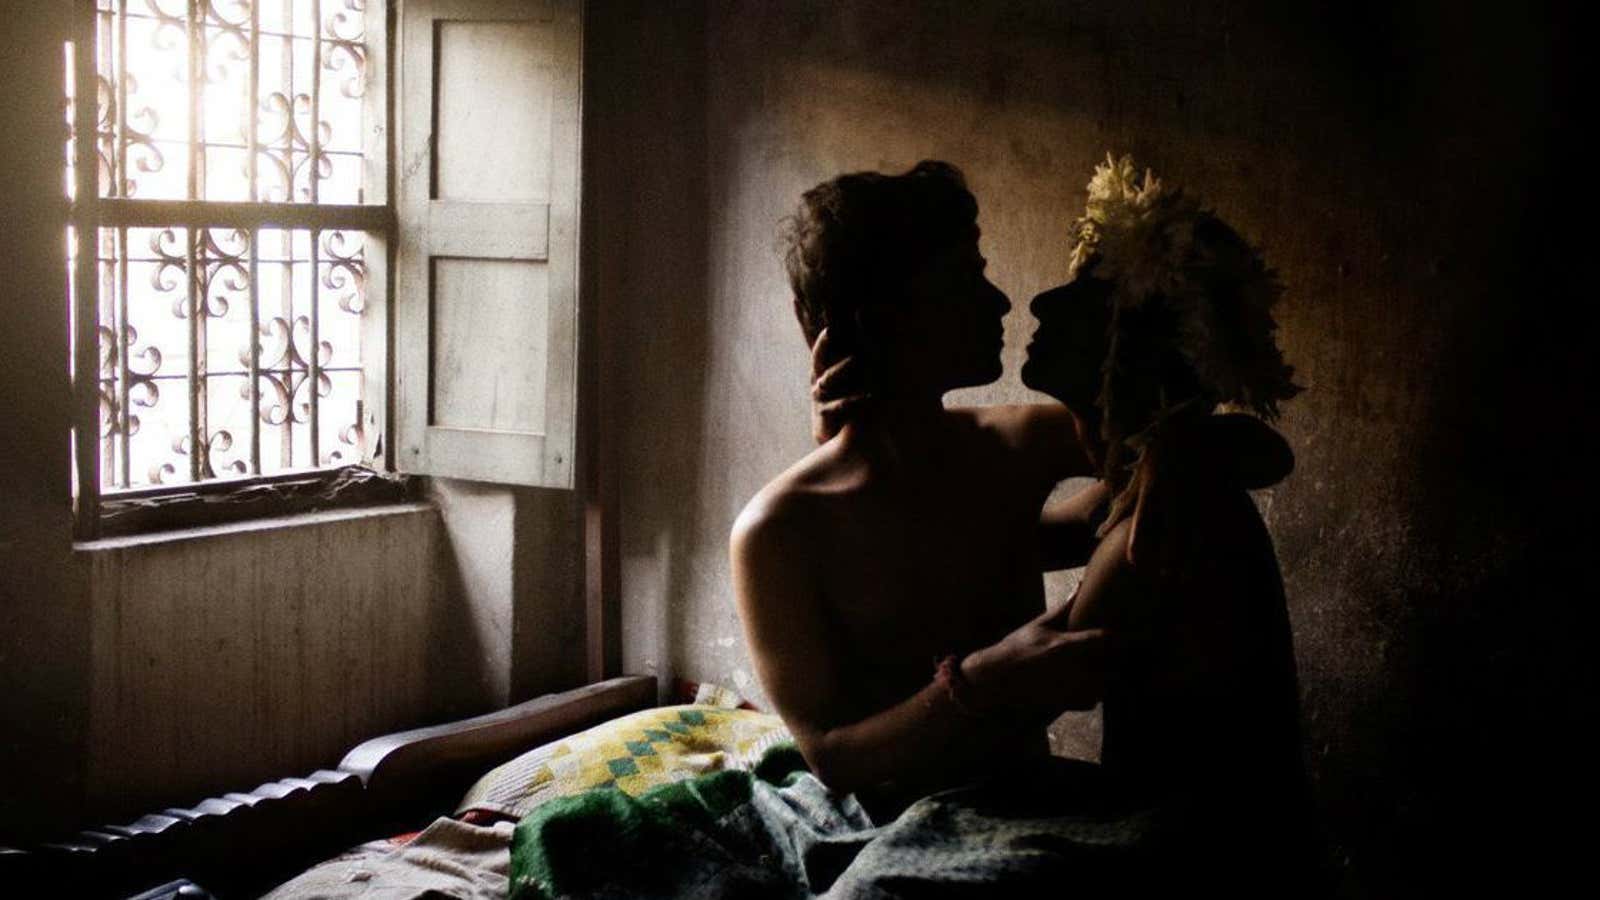 In photos: The private lives of India’s LGBTQ community